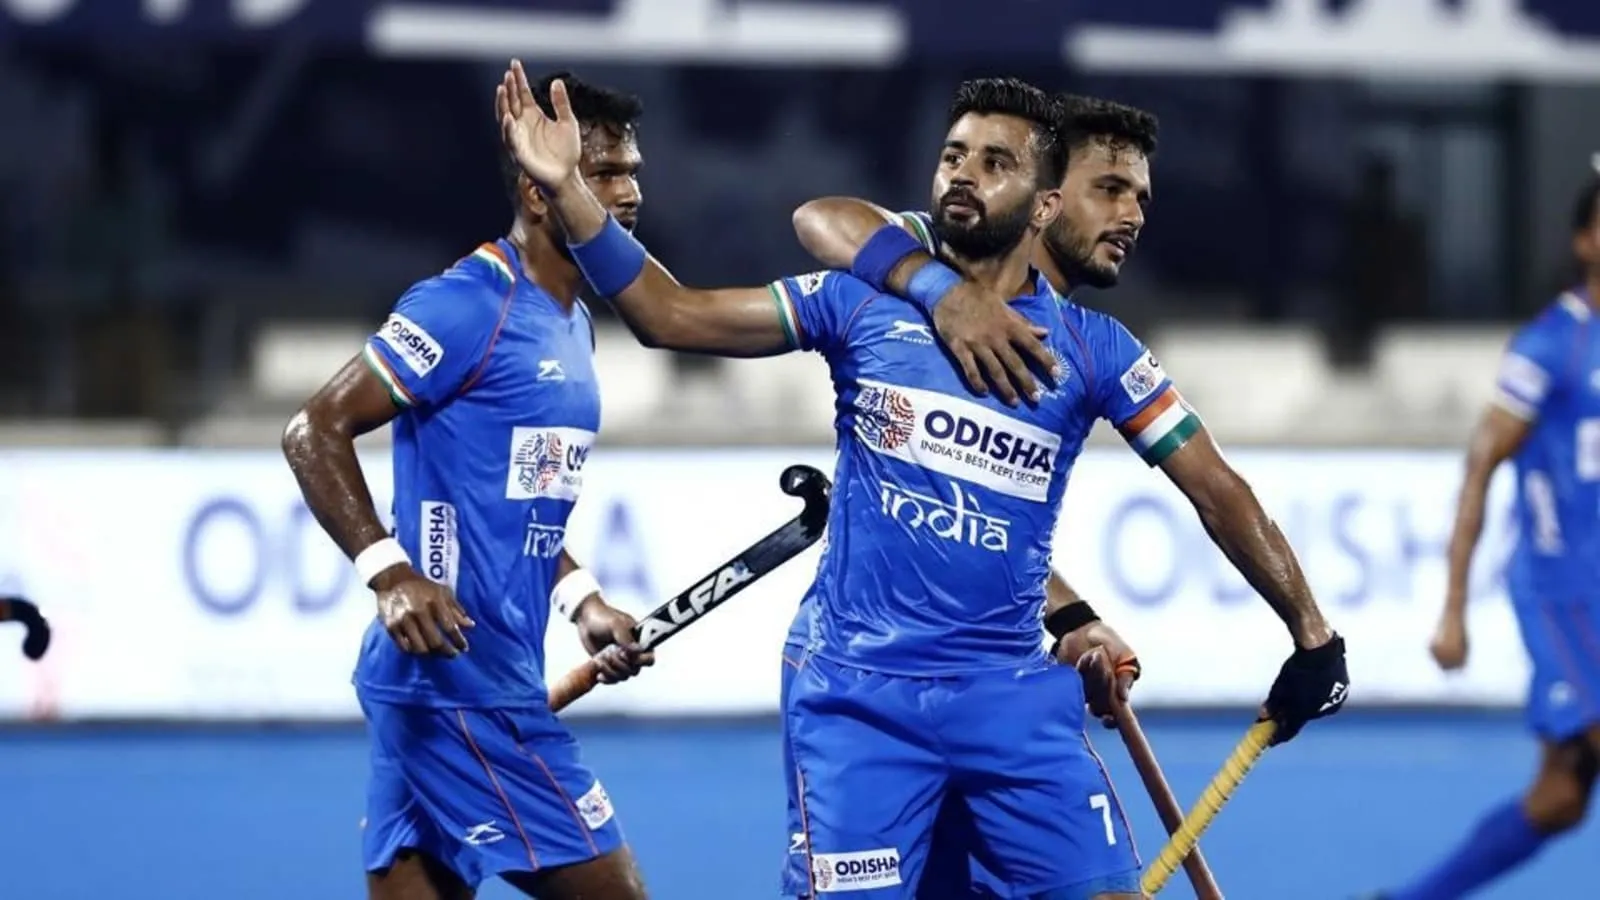 Tokyo Olympics 2020: India mens' hockey team form guide - Strength,  weaknesses, recent results | Olympics - Hindustan Times